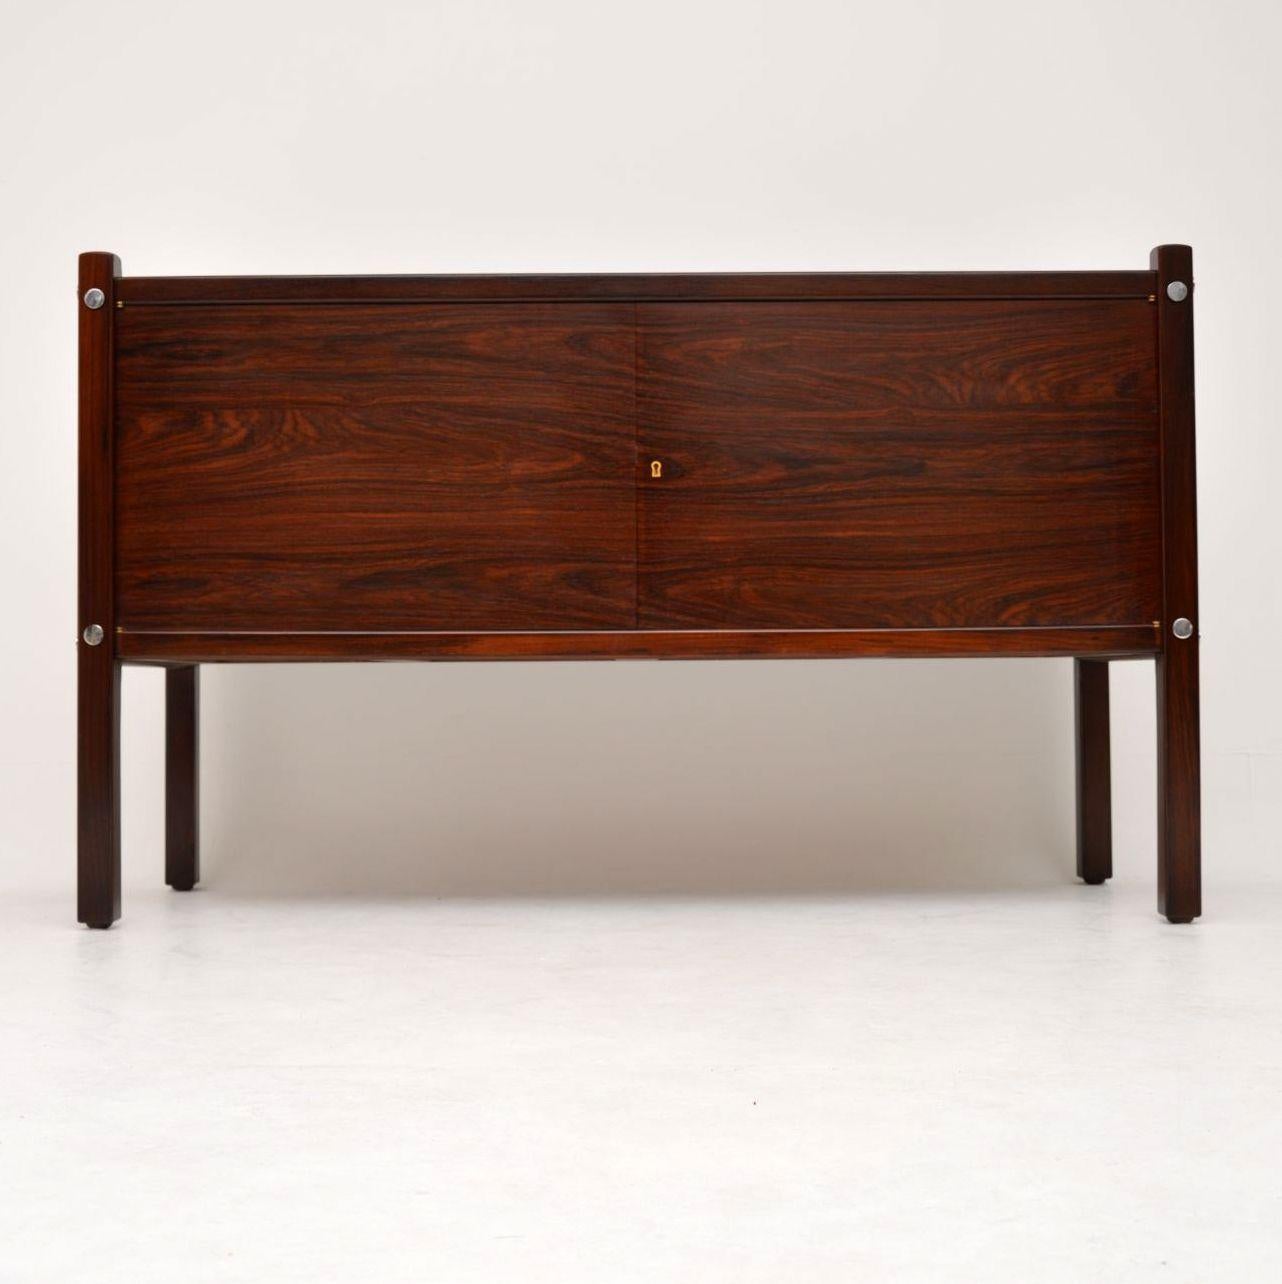 A stunning and extremely rare vintage sideboard by the important Brazilian designer Sergio Rodriguez. This model is called the Luciana sideboard, it was made in Brazil during the 1960s by OCA. We have had this stripped and re-polished to a very high